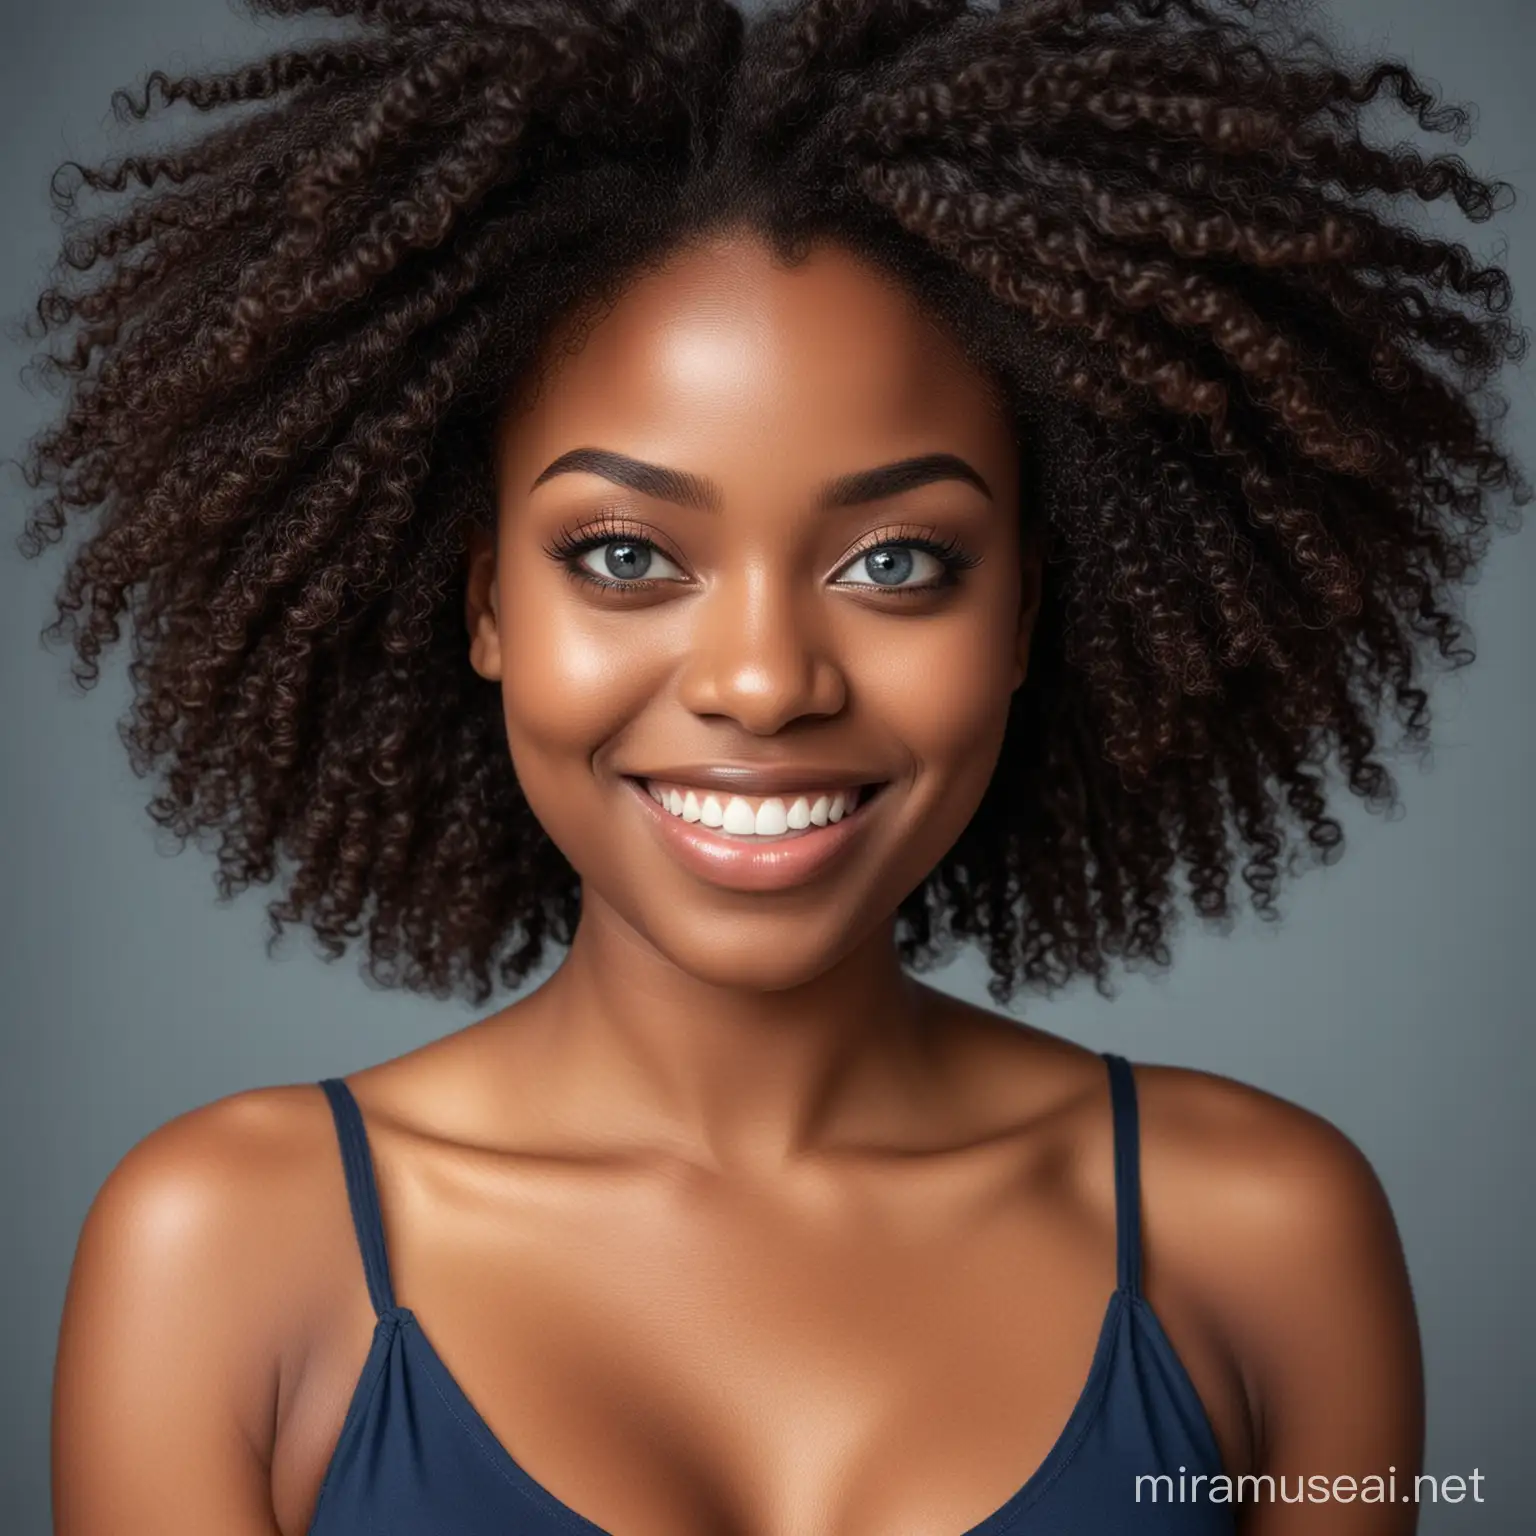 Smiling African Woman with Deep Blue Eyes and Natural Hair